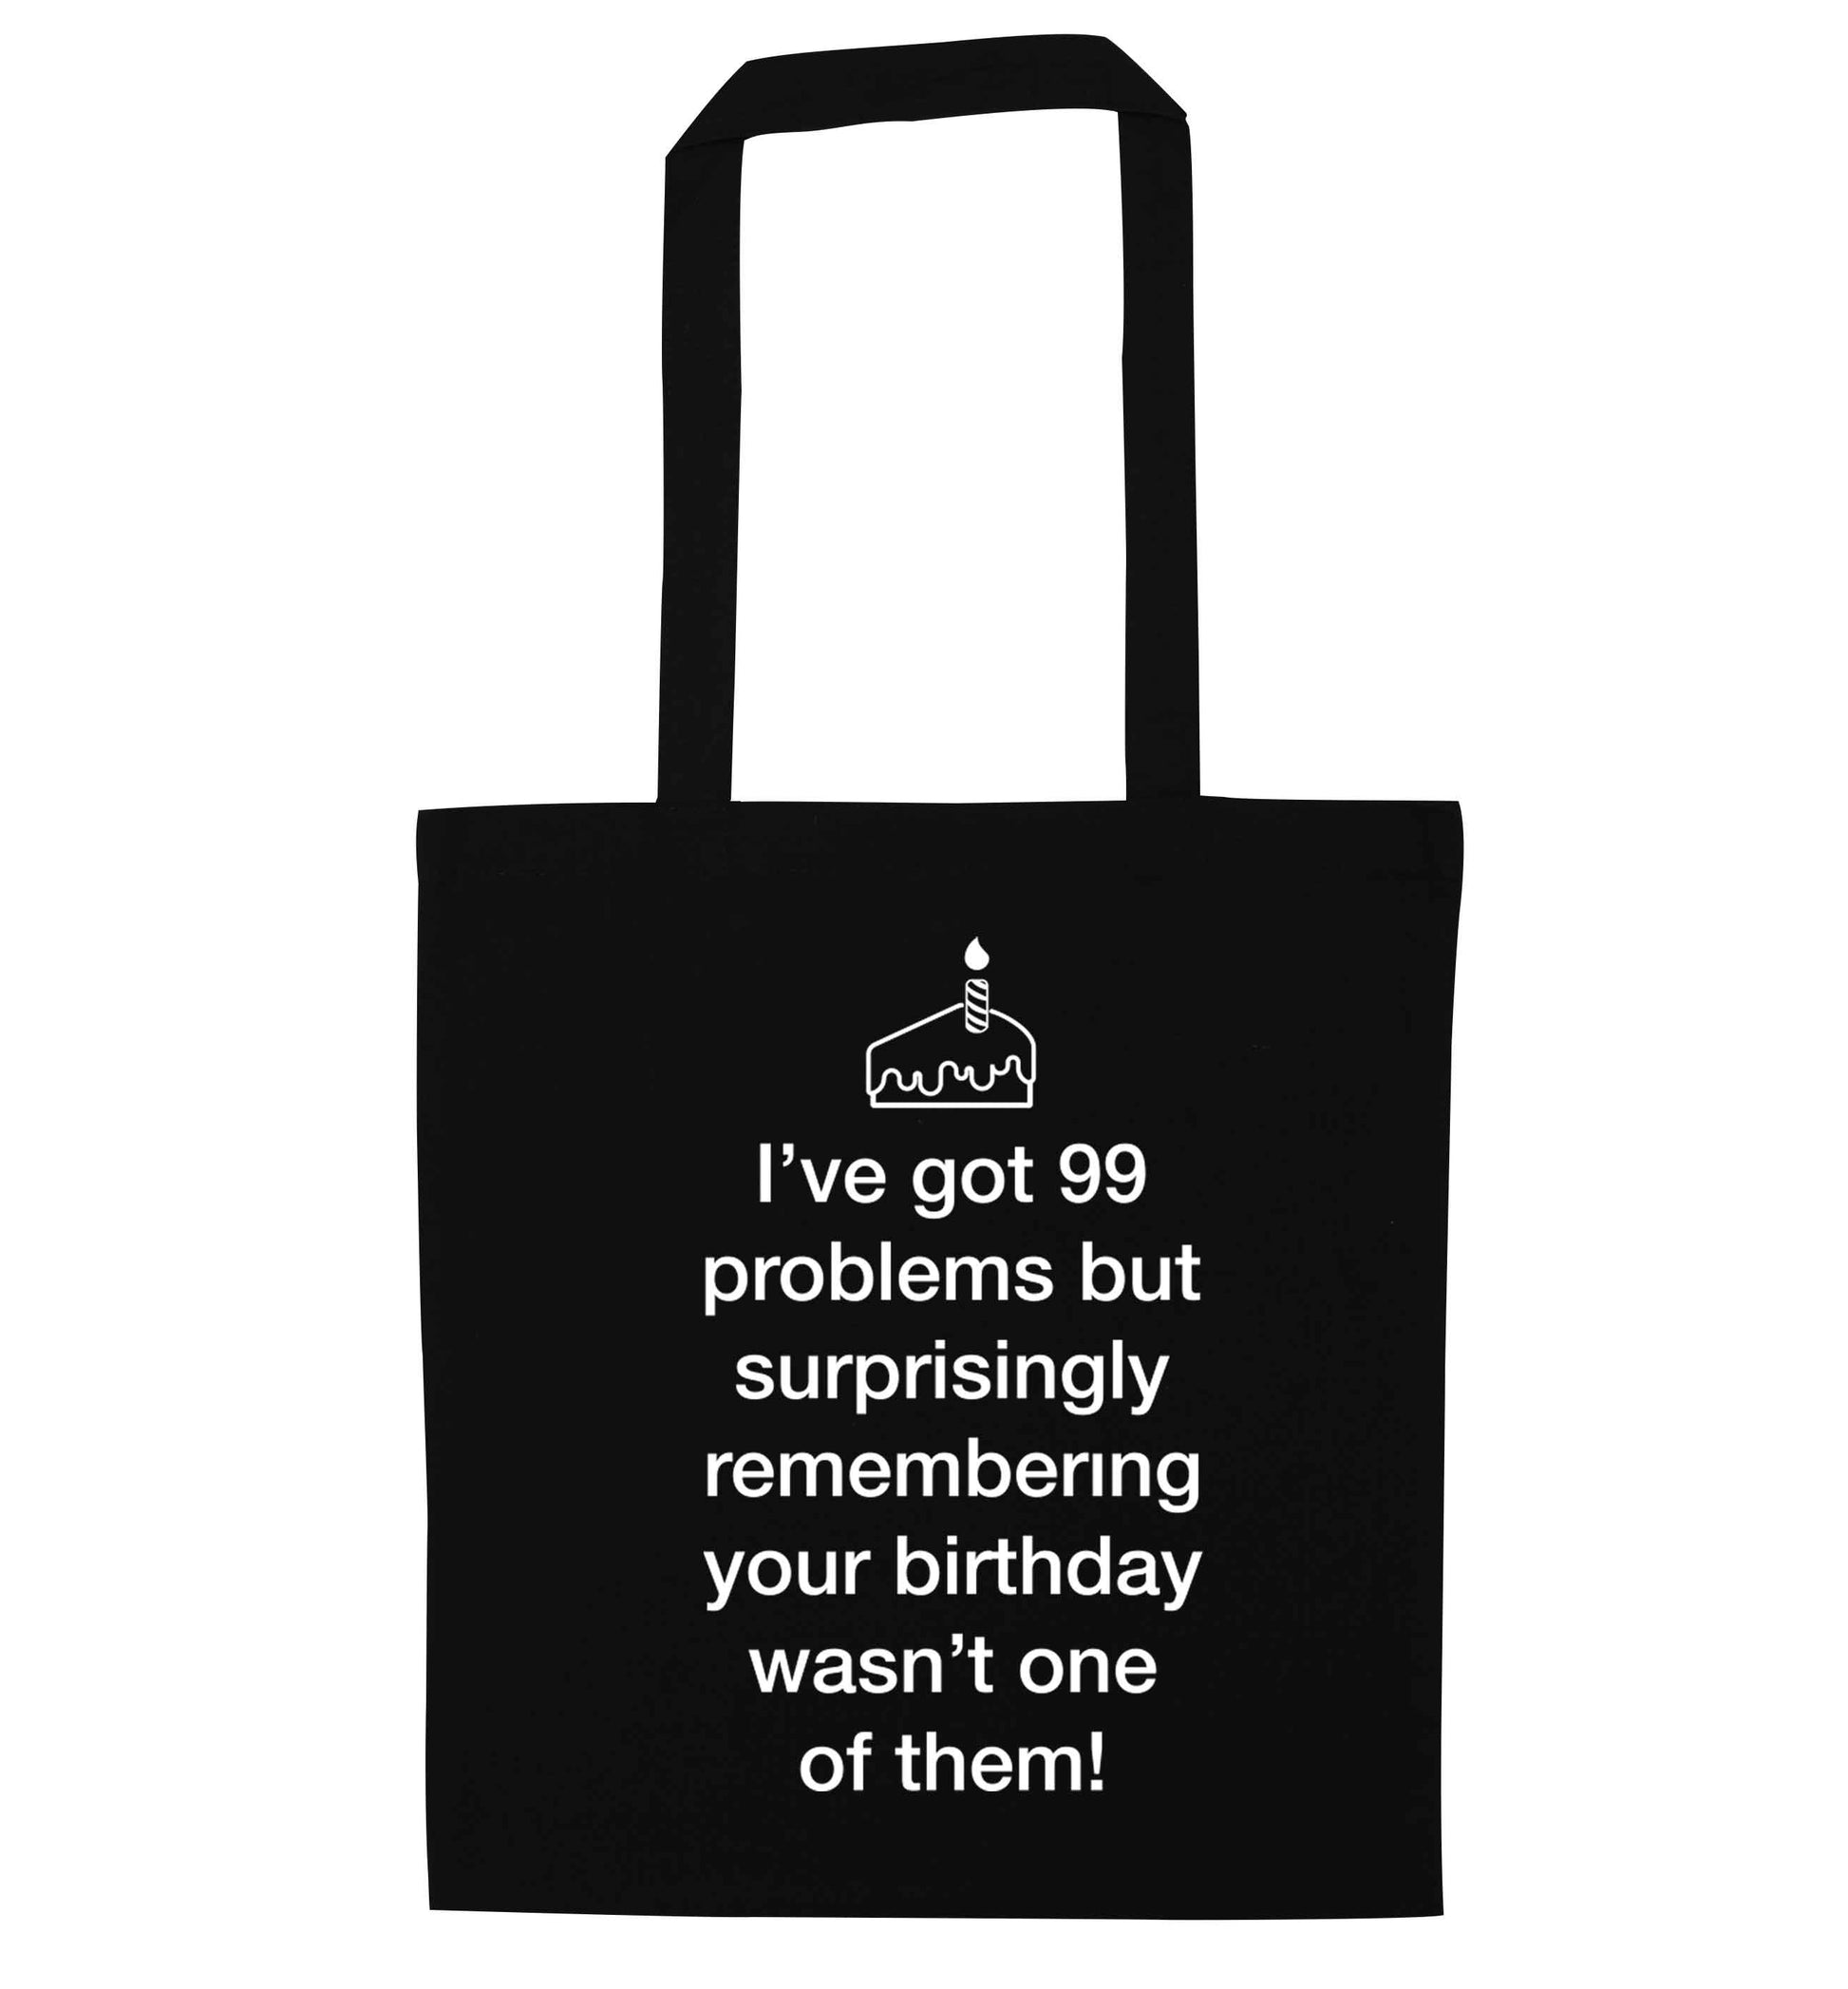 I've got 99 problems but surprisingly remembering your birthday wasn't one of them! black tote bag